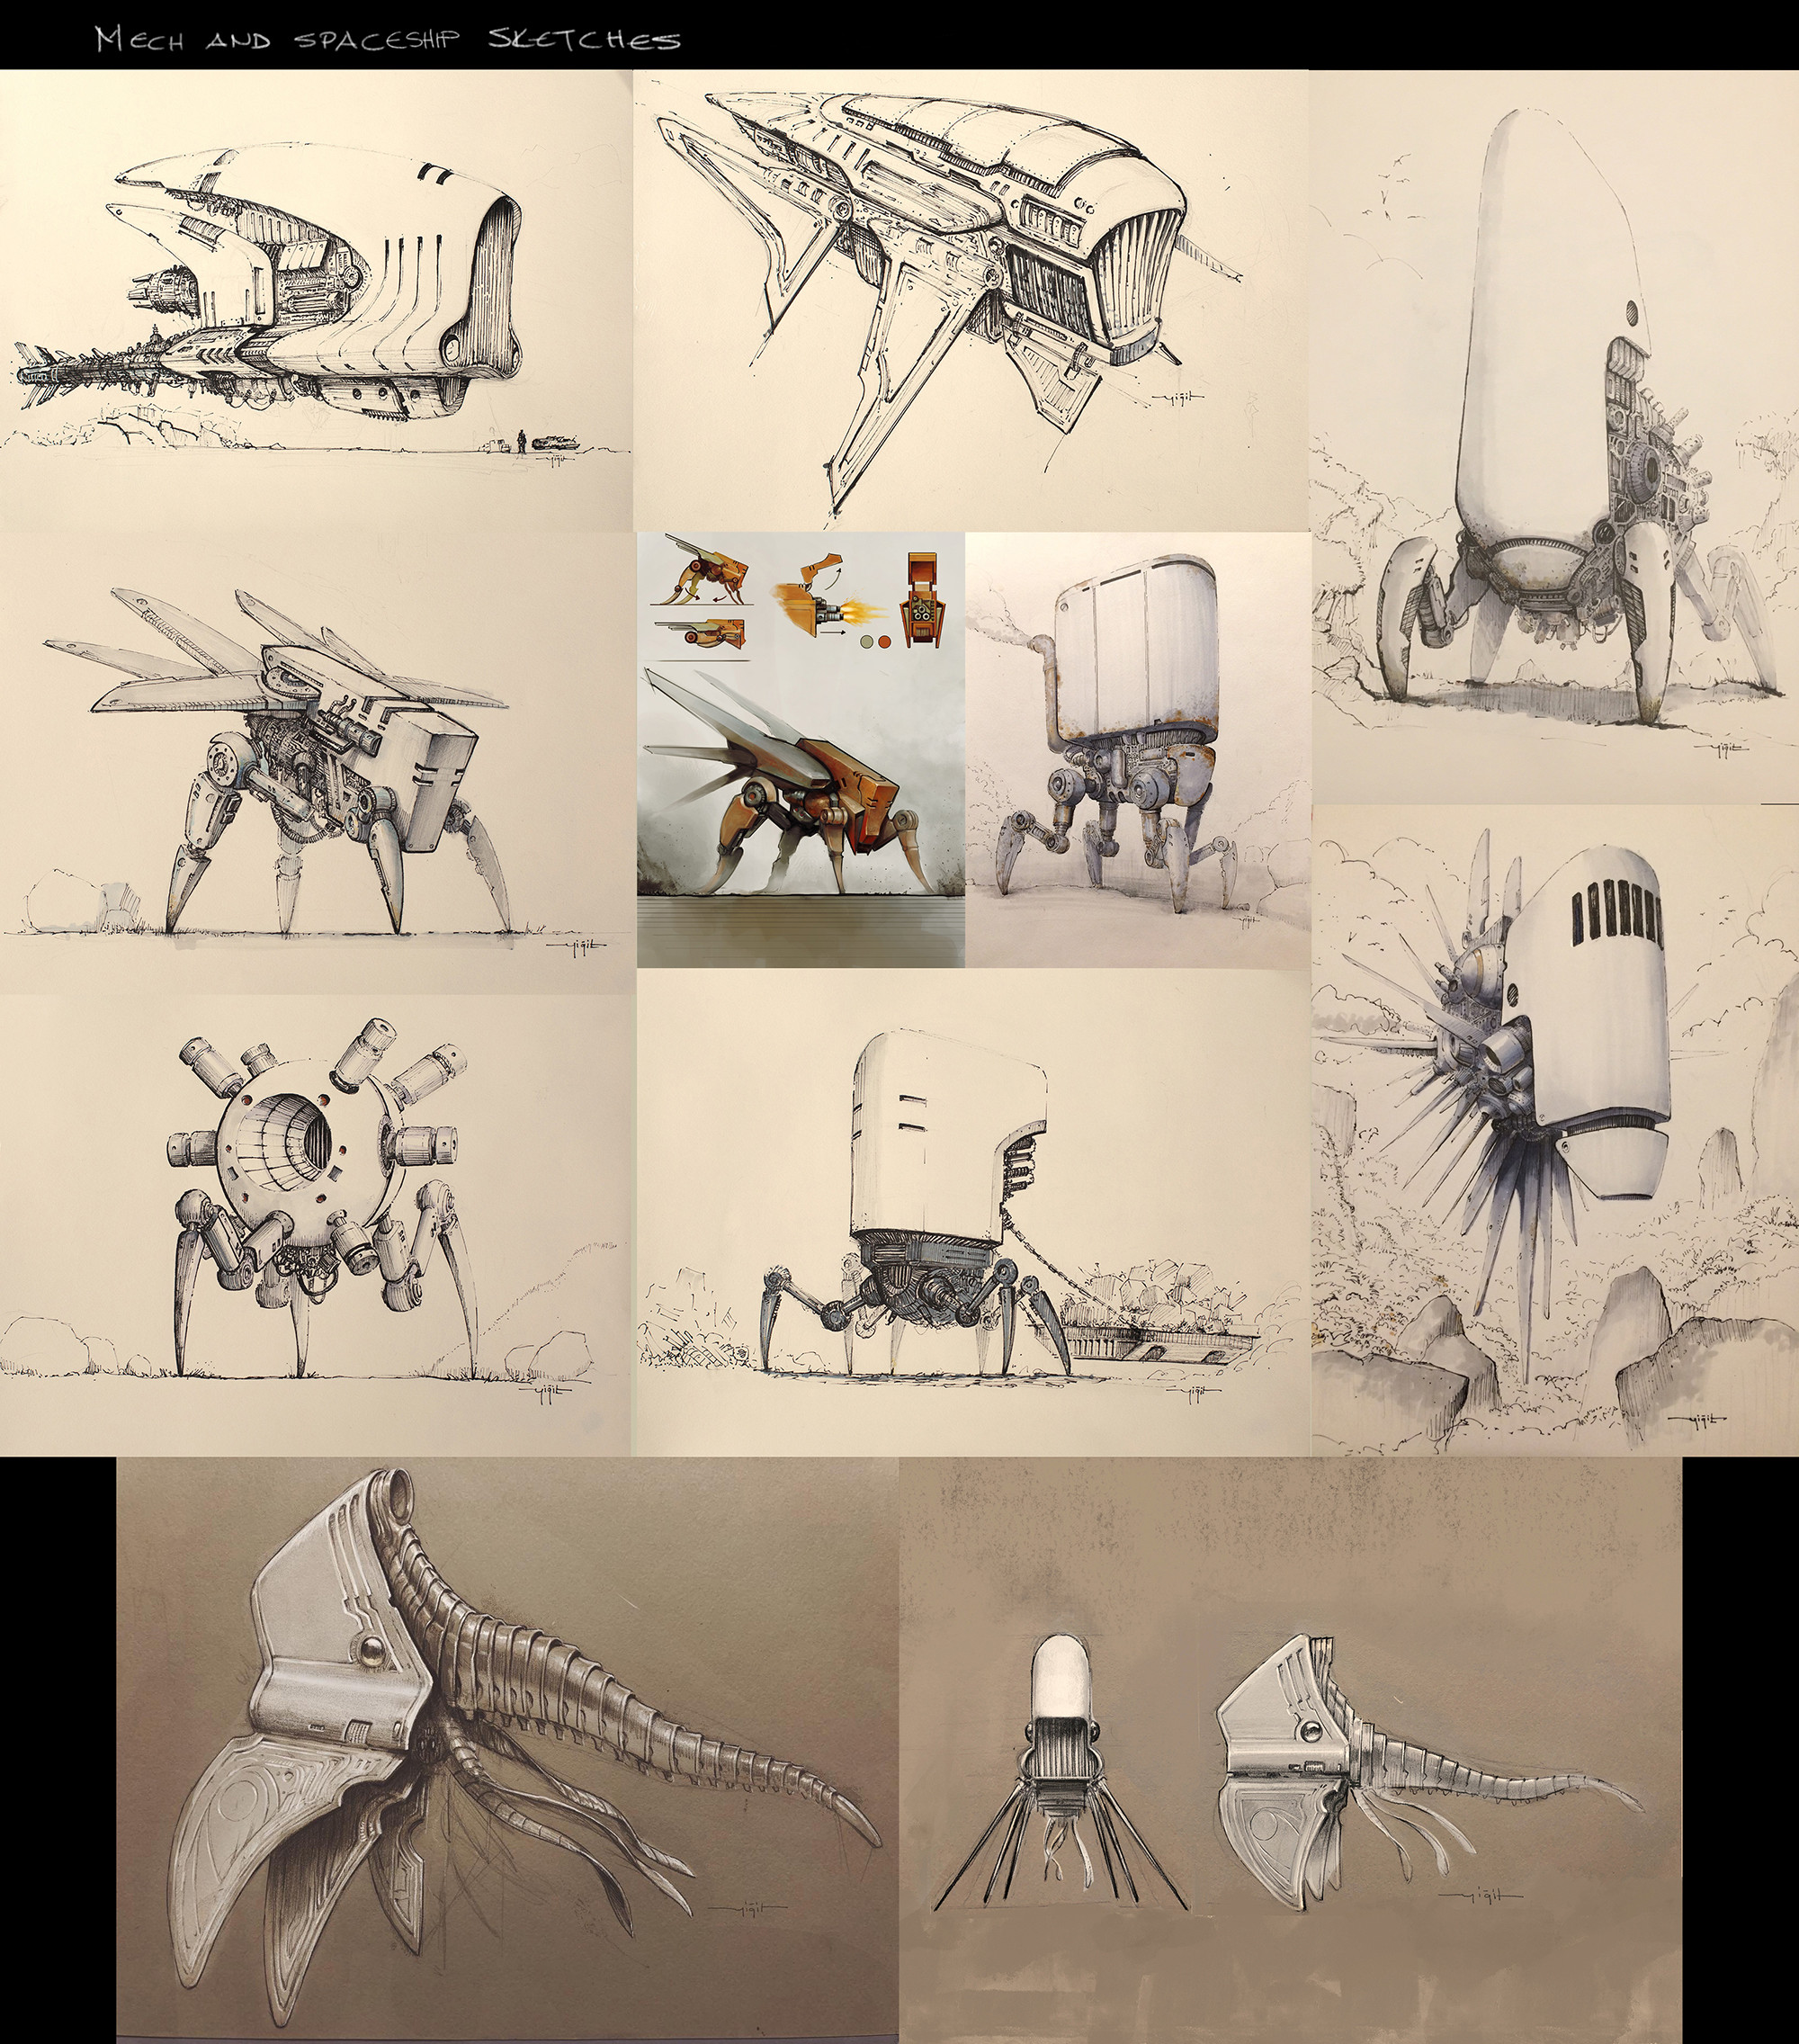 These were a series of spaceship and mech concepts i made, which were influenced by aquatic life and insects. I used ball point pen to emphasize a more organic feel. 